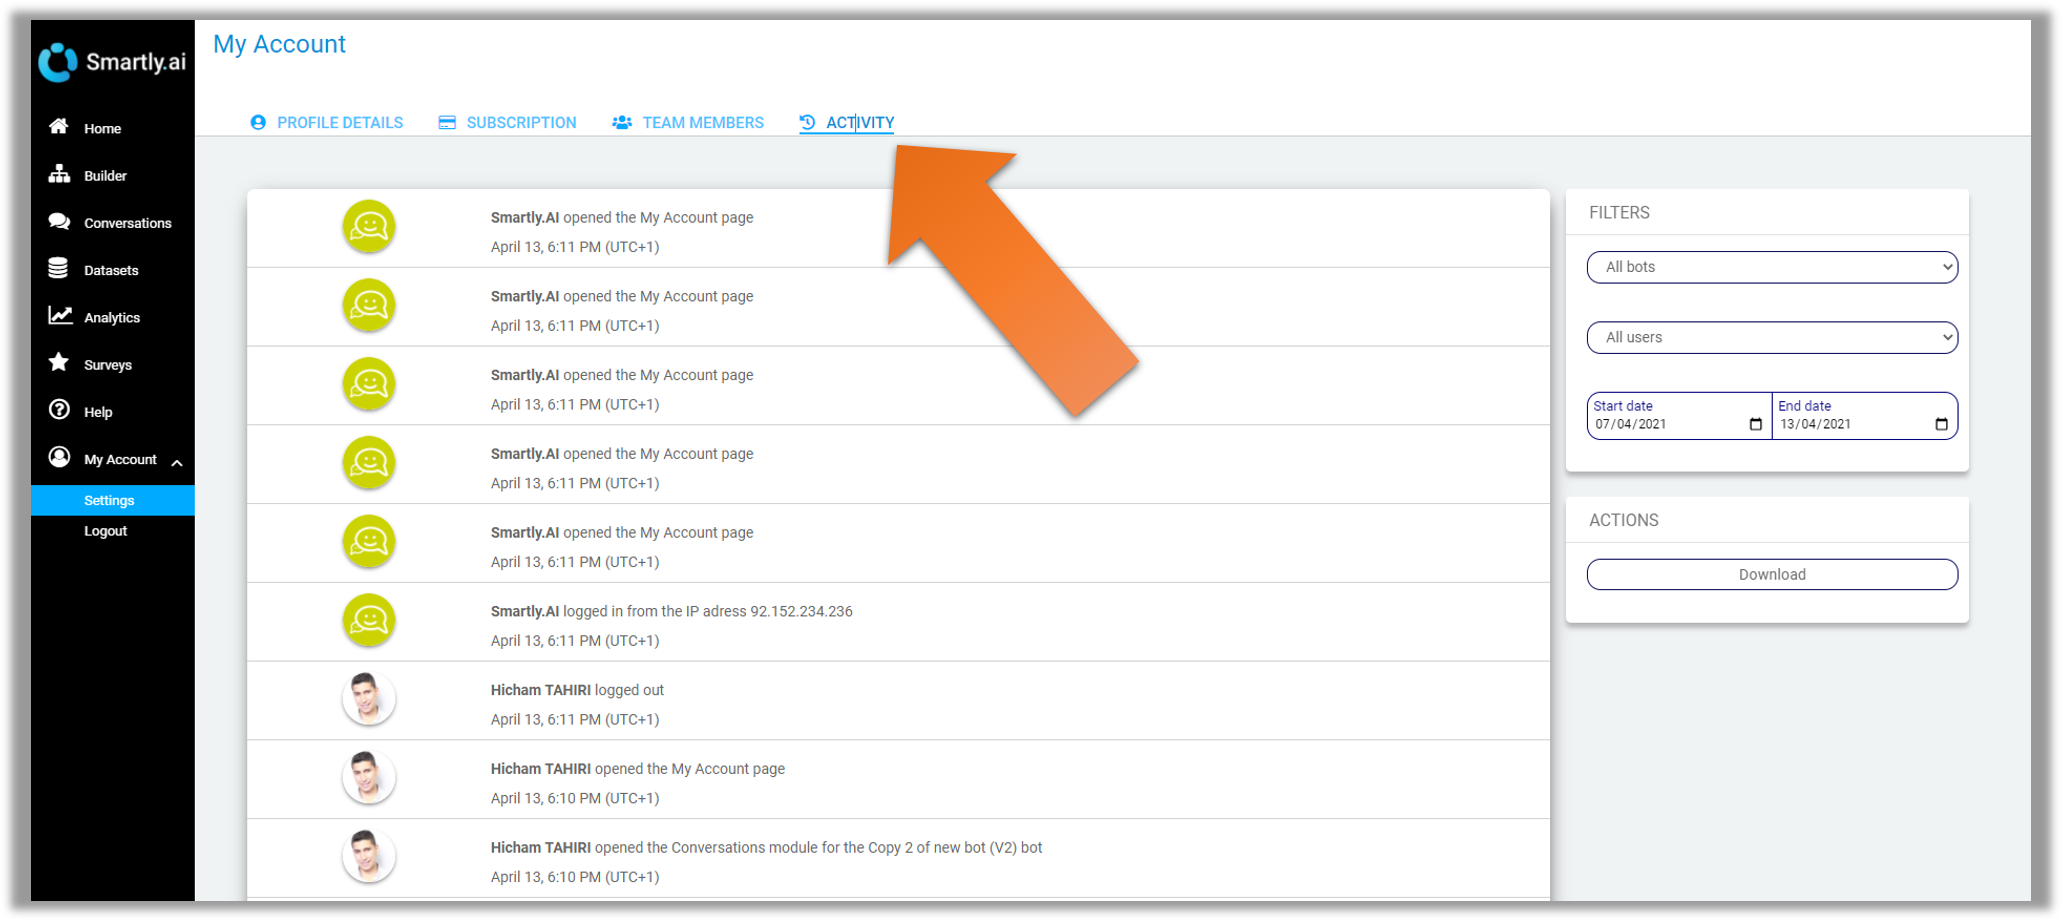 Everything happening in your team is available here in the Activity logs view.